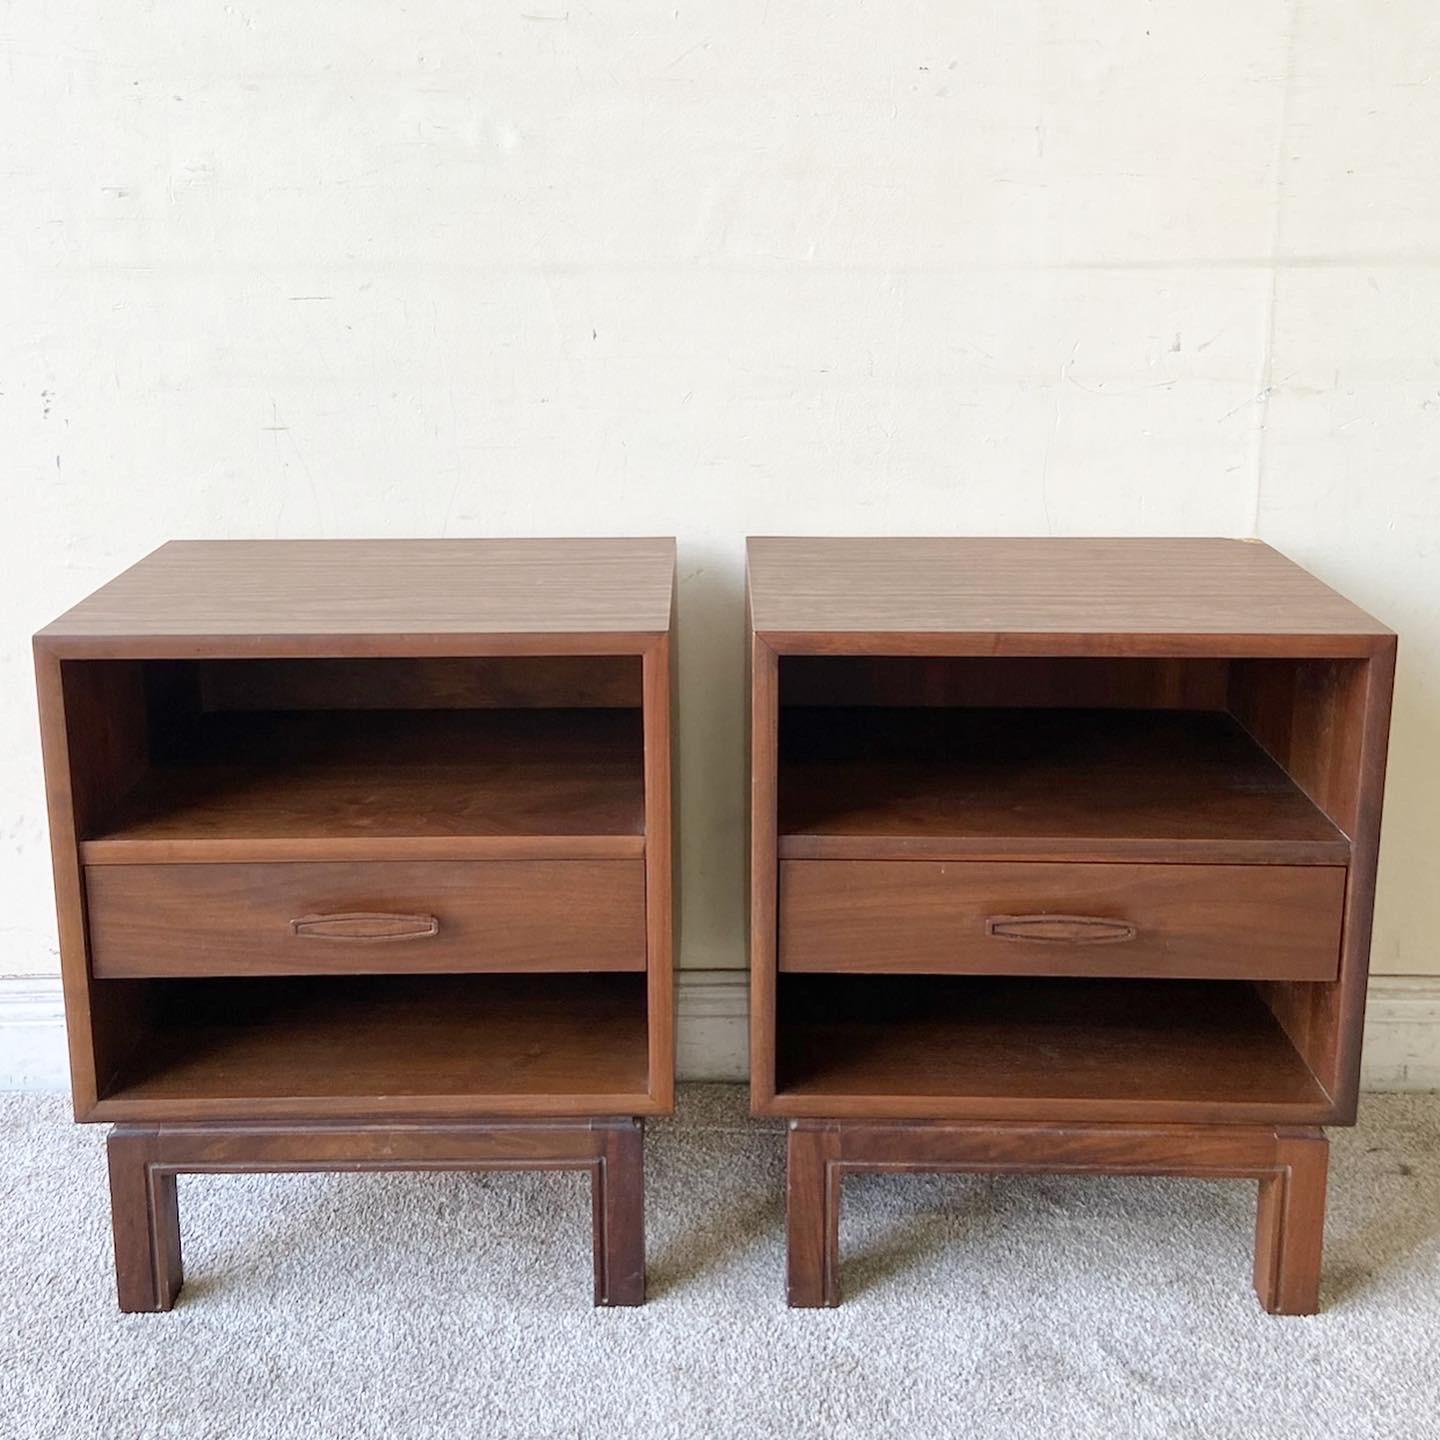 Phenomenal pair of mid century modern wooden nighstands. Each feature one drawer with an open shelf above and below the drawer. 